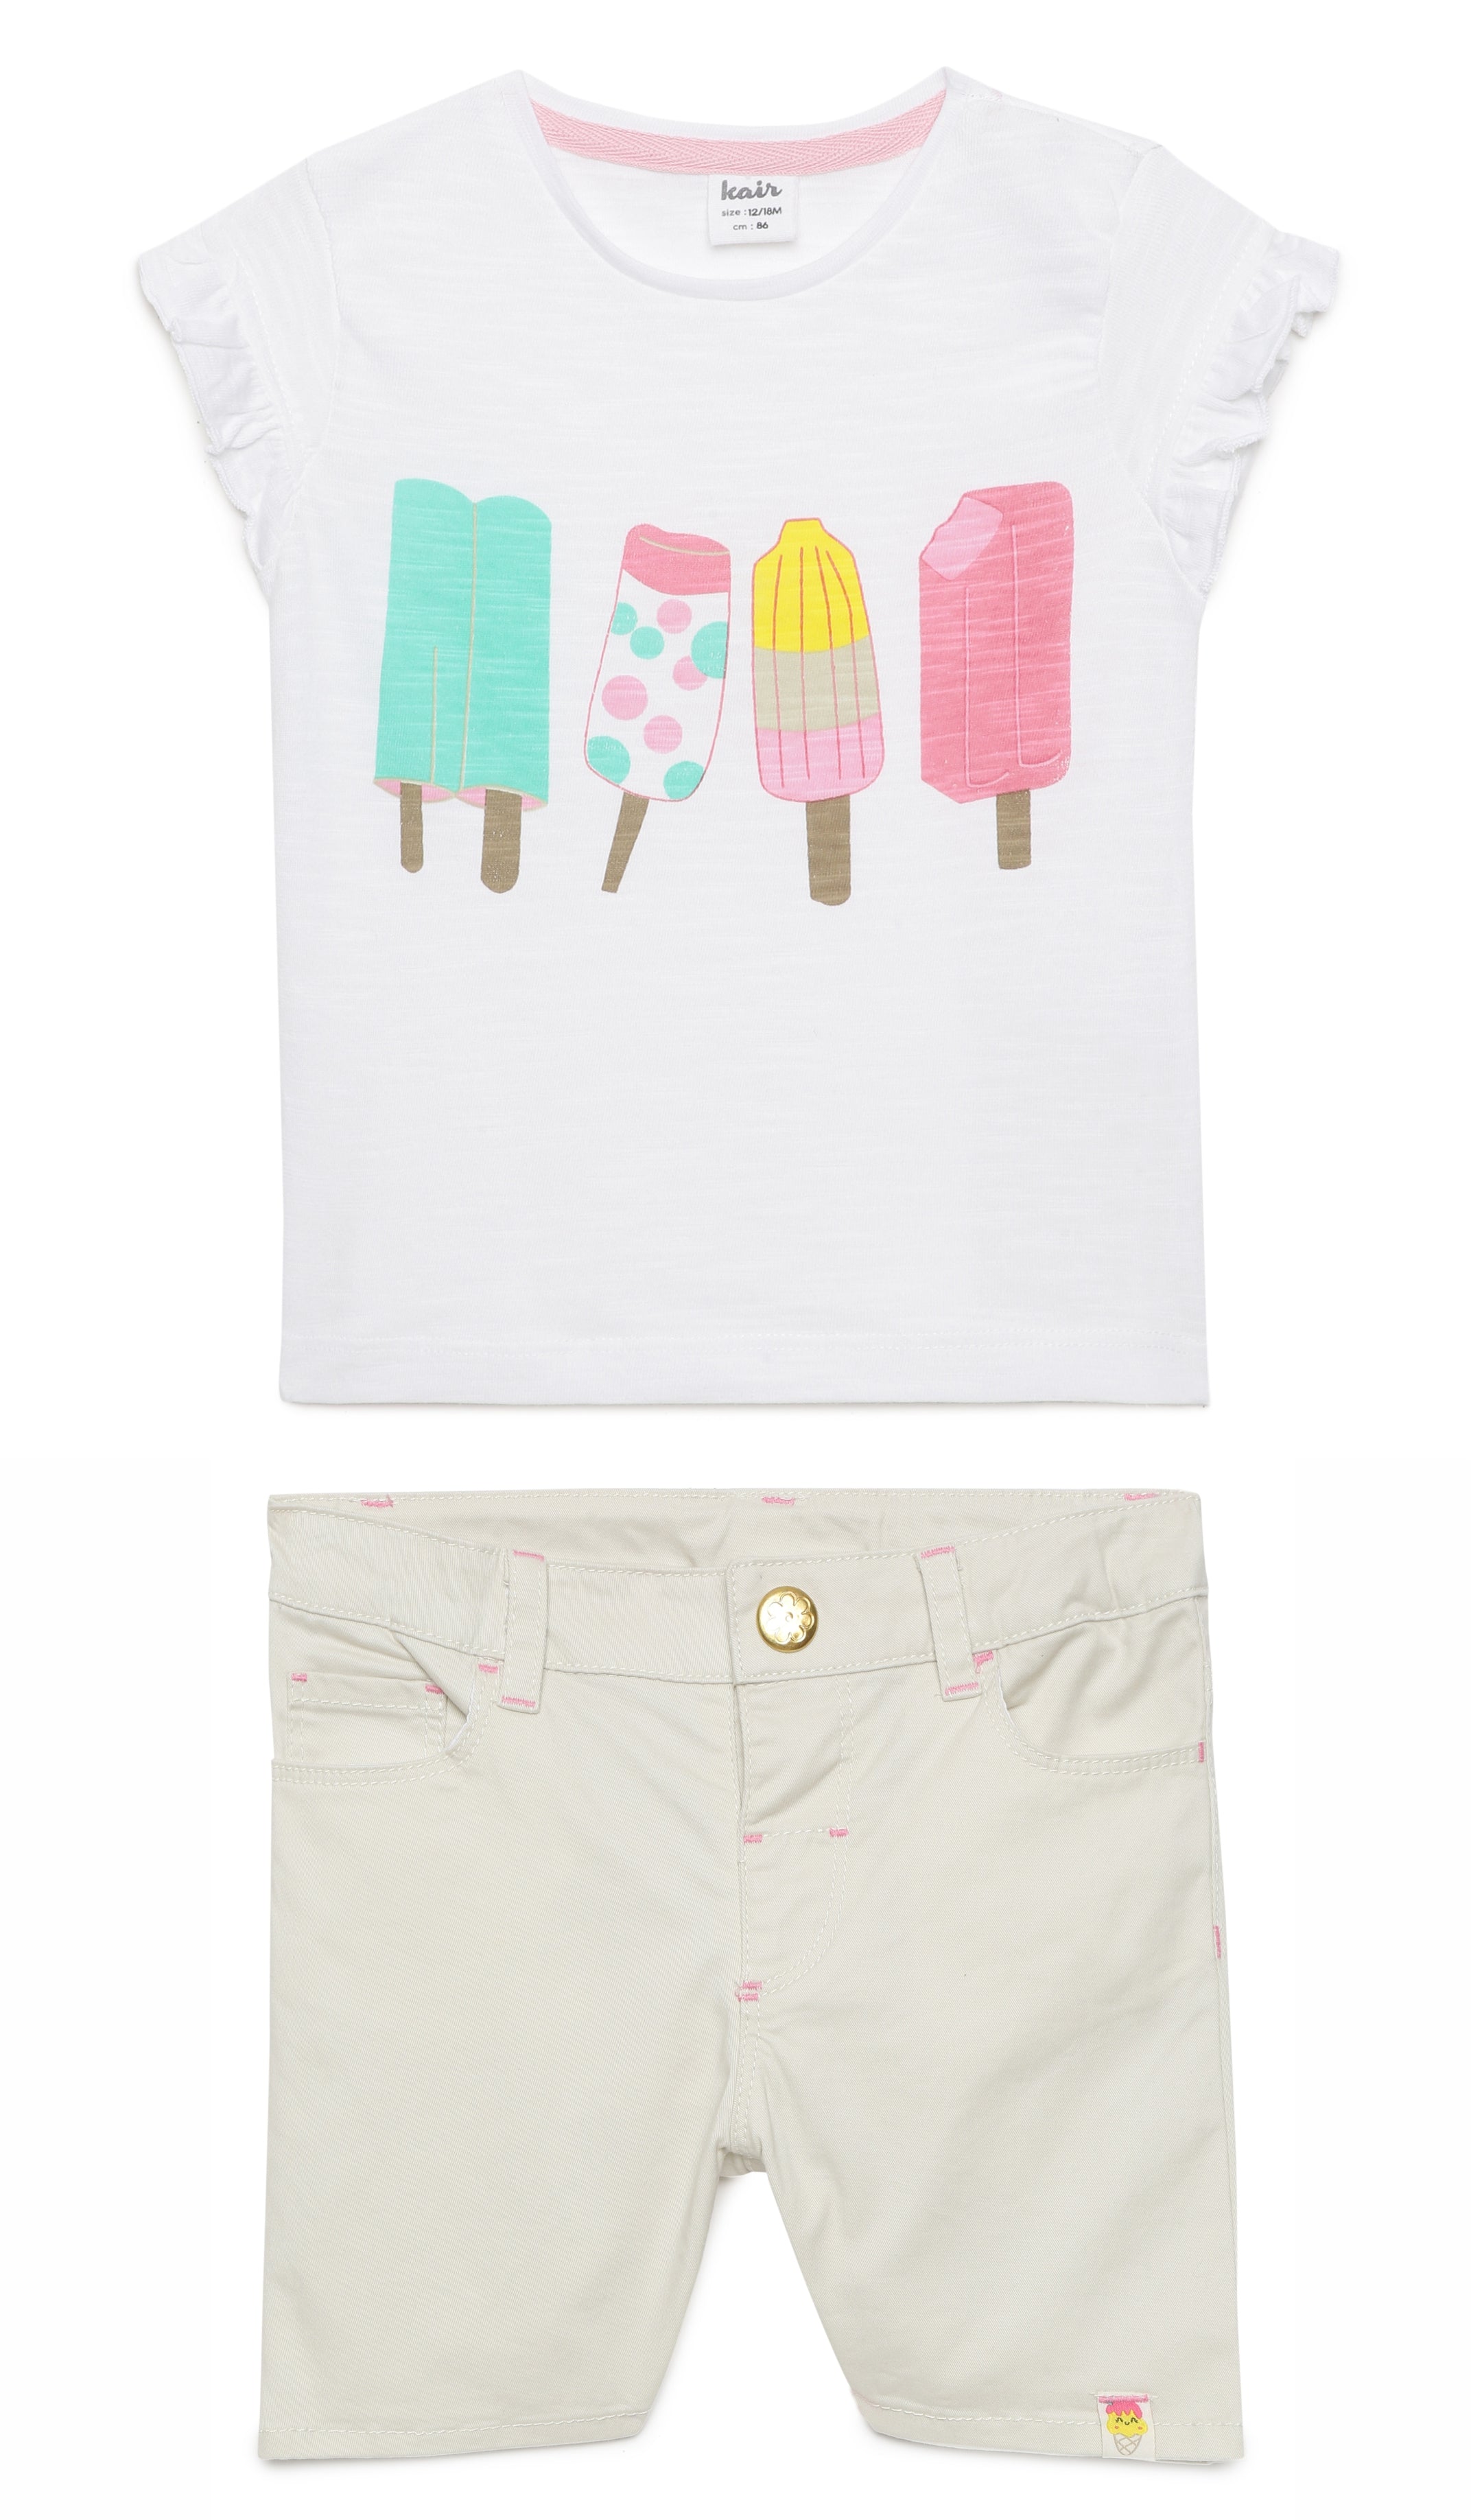 Baby Girls Solid Twill Shorts